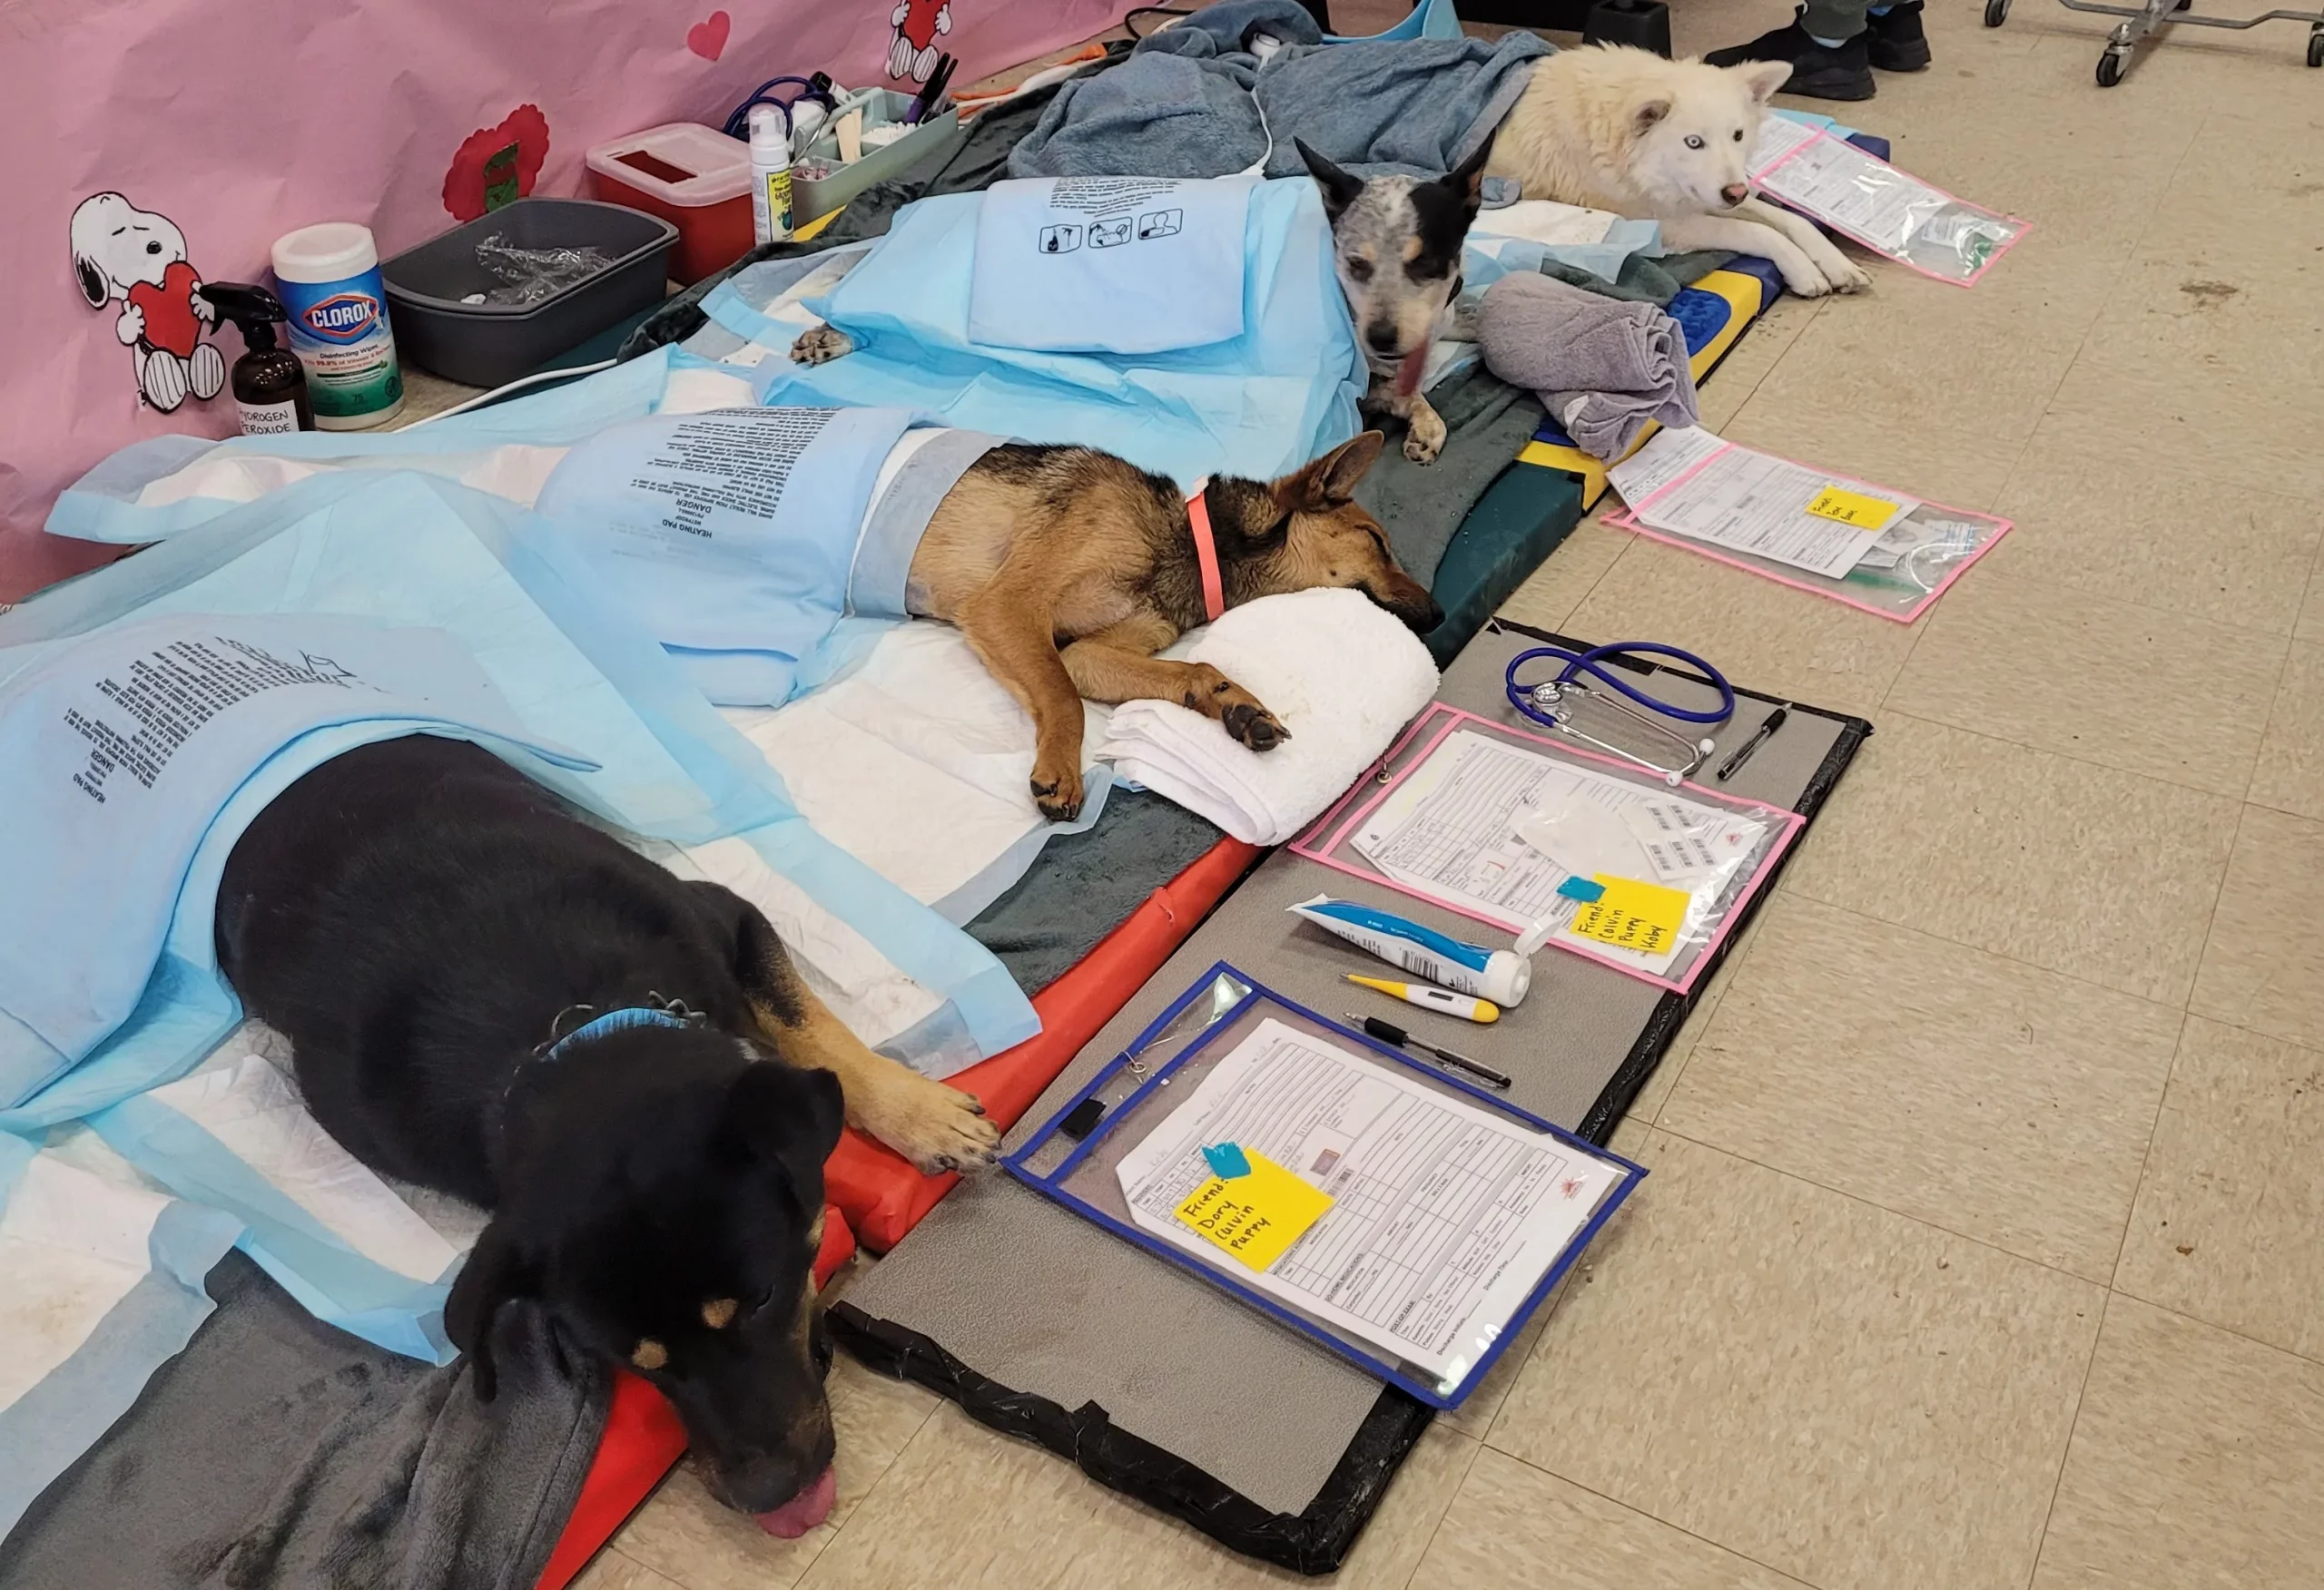 A row of dogs lay down covered in heating pads and blankets. In front of them are charts, medicine, and thermometers.